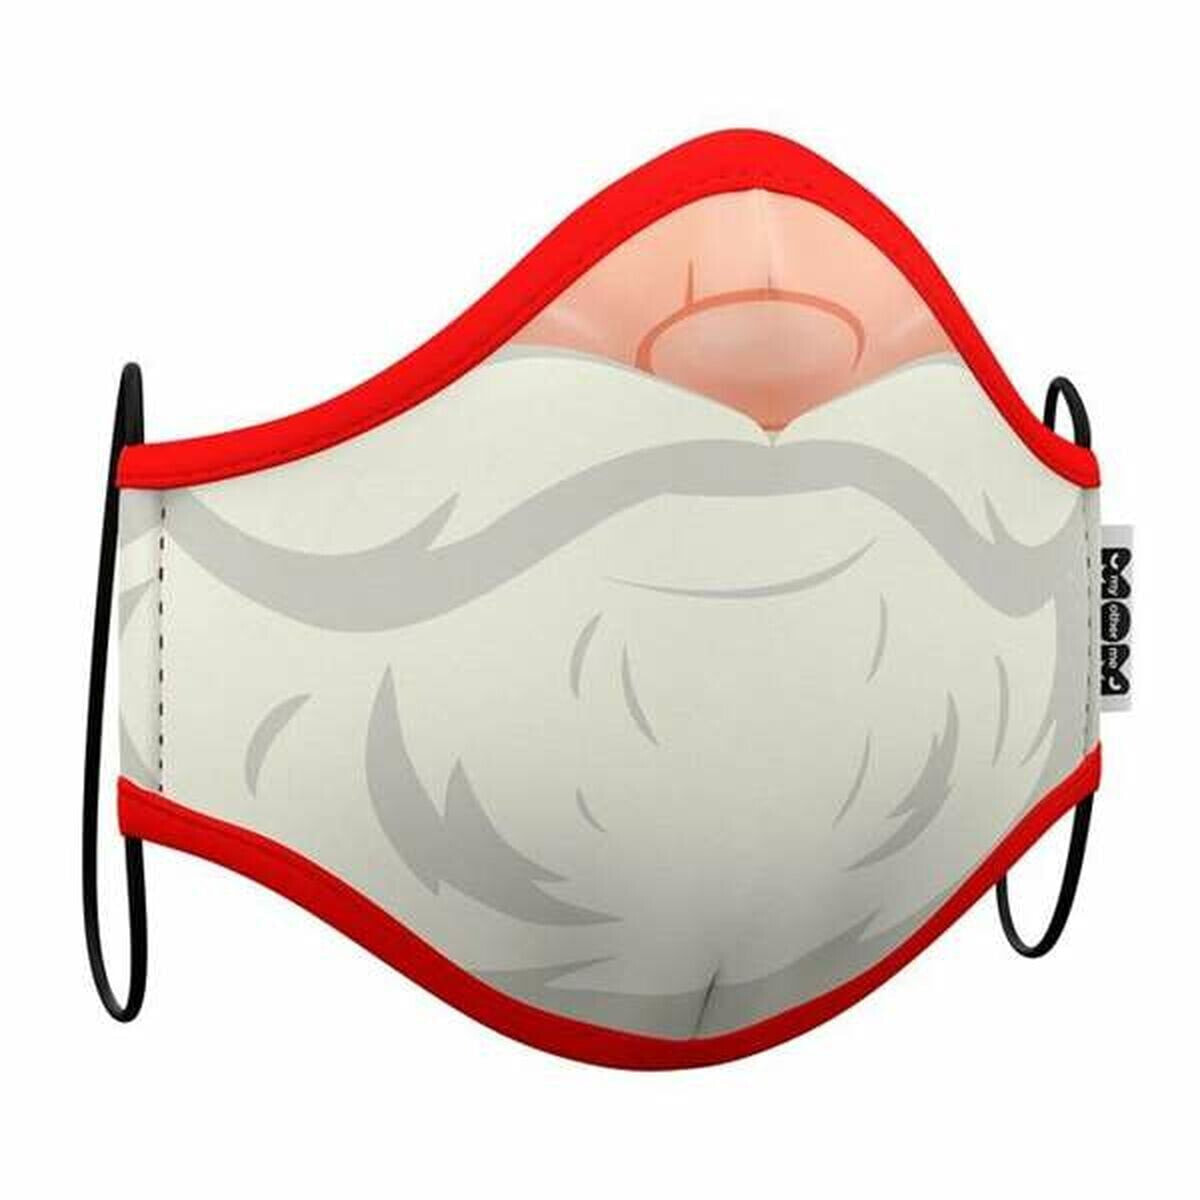 Hygienic Reusable Fabric Mask My Other Me Christmas Santa Claus